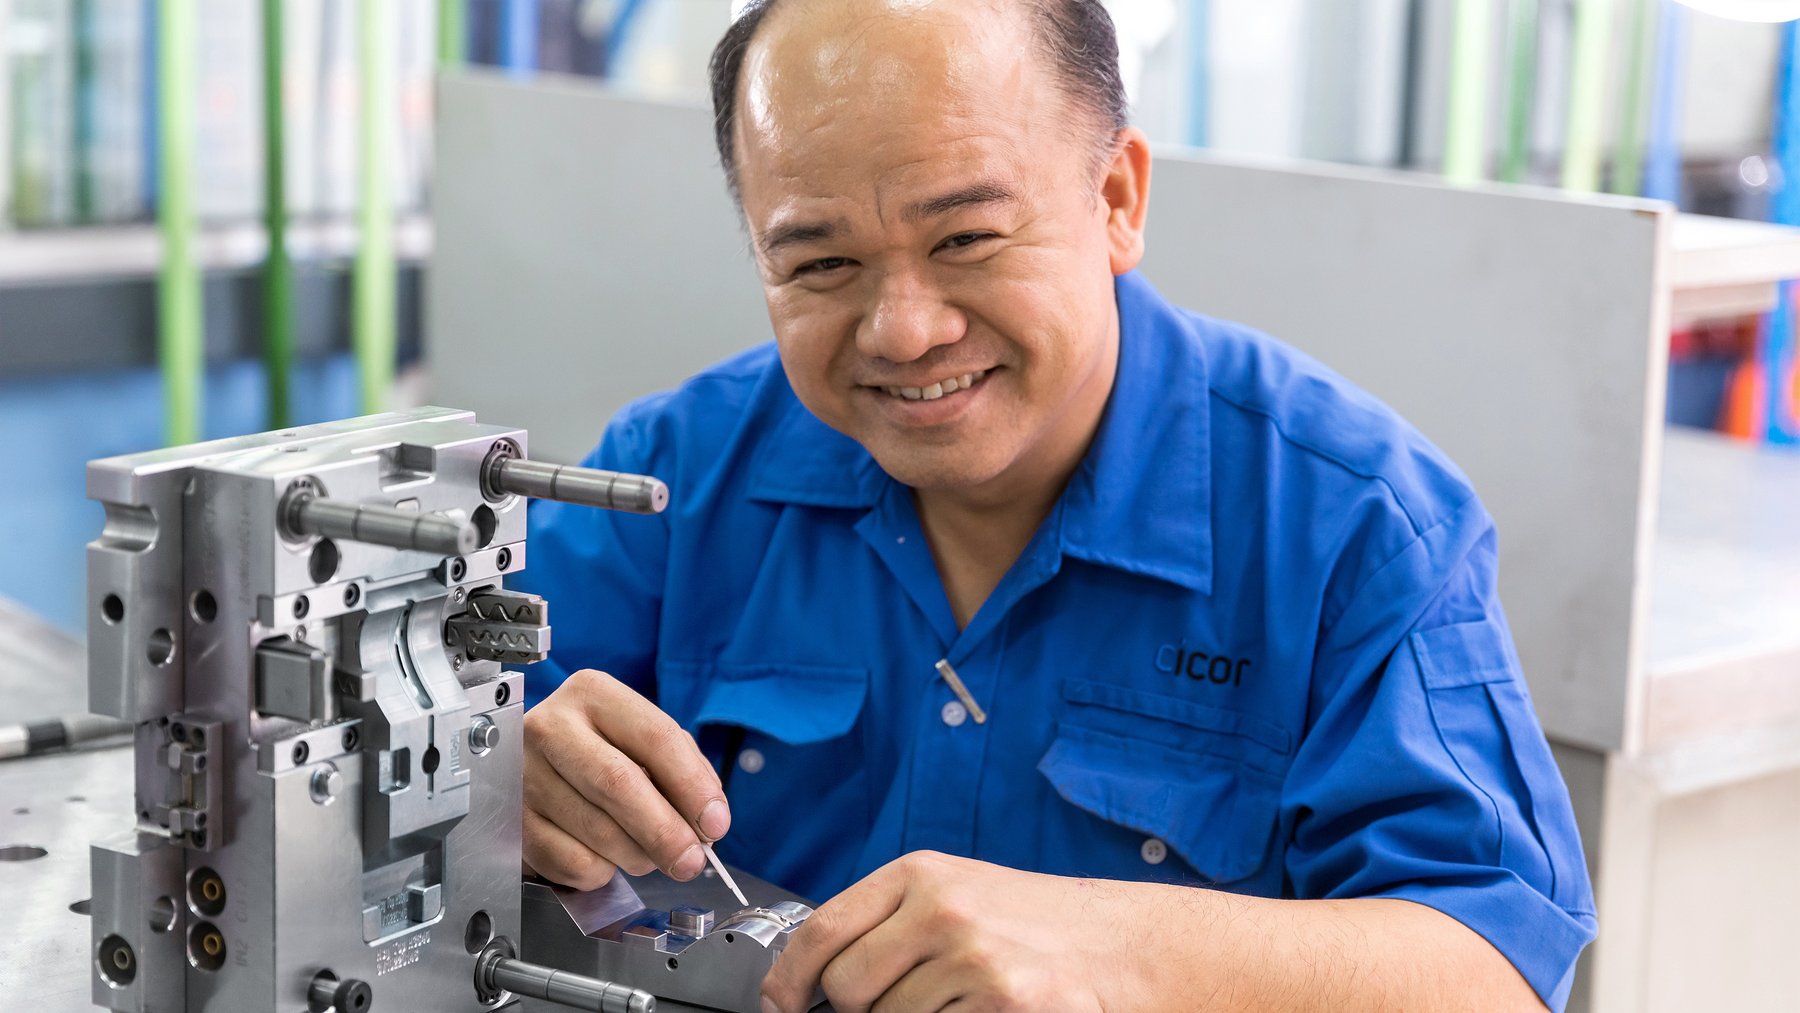 Cicor employee working in the tooling department at the Cicor site in Singapore